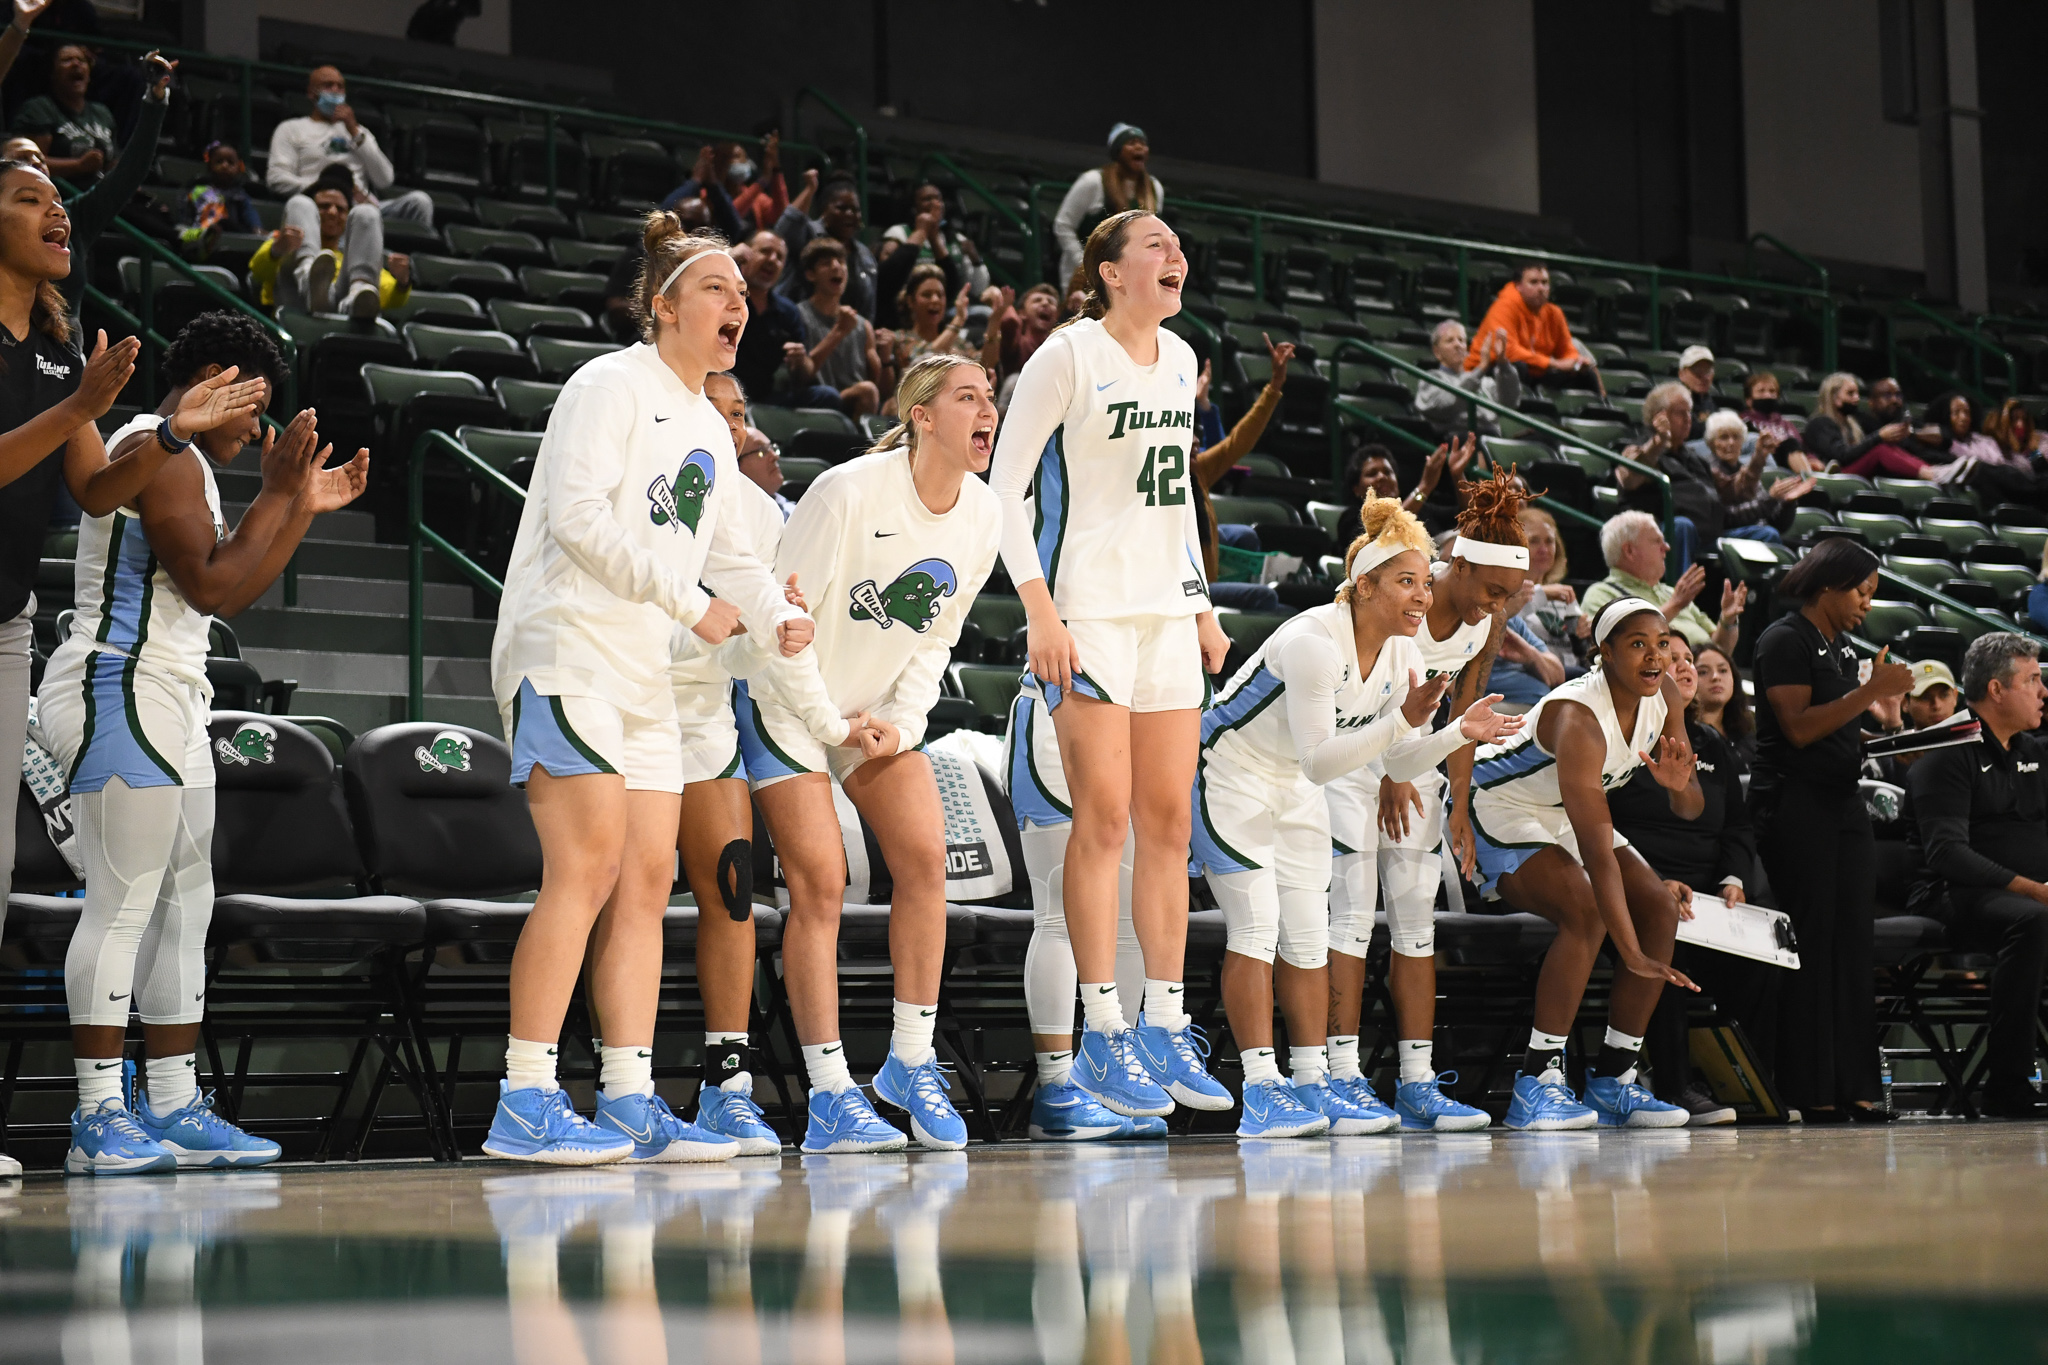 Where to get Tulane Basketball tickets?